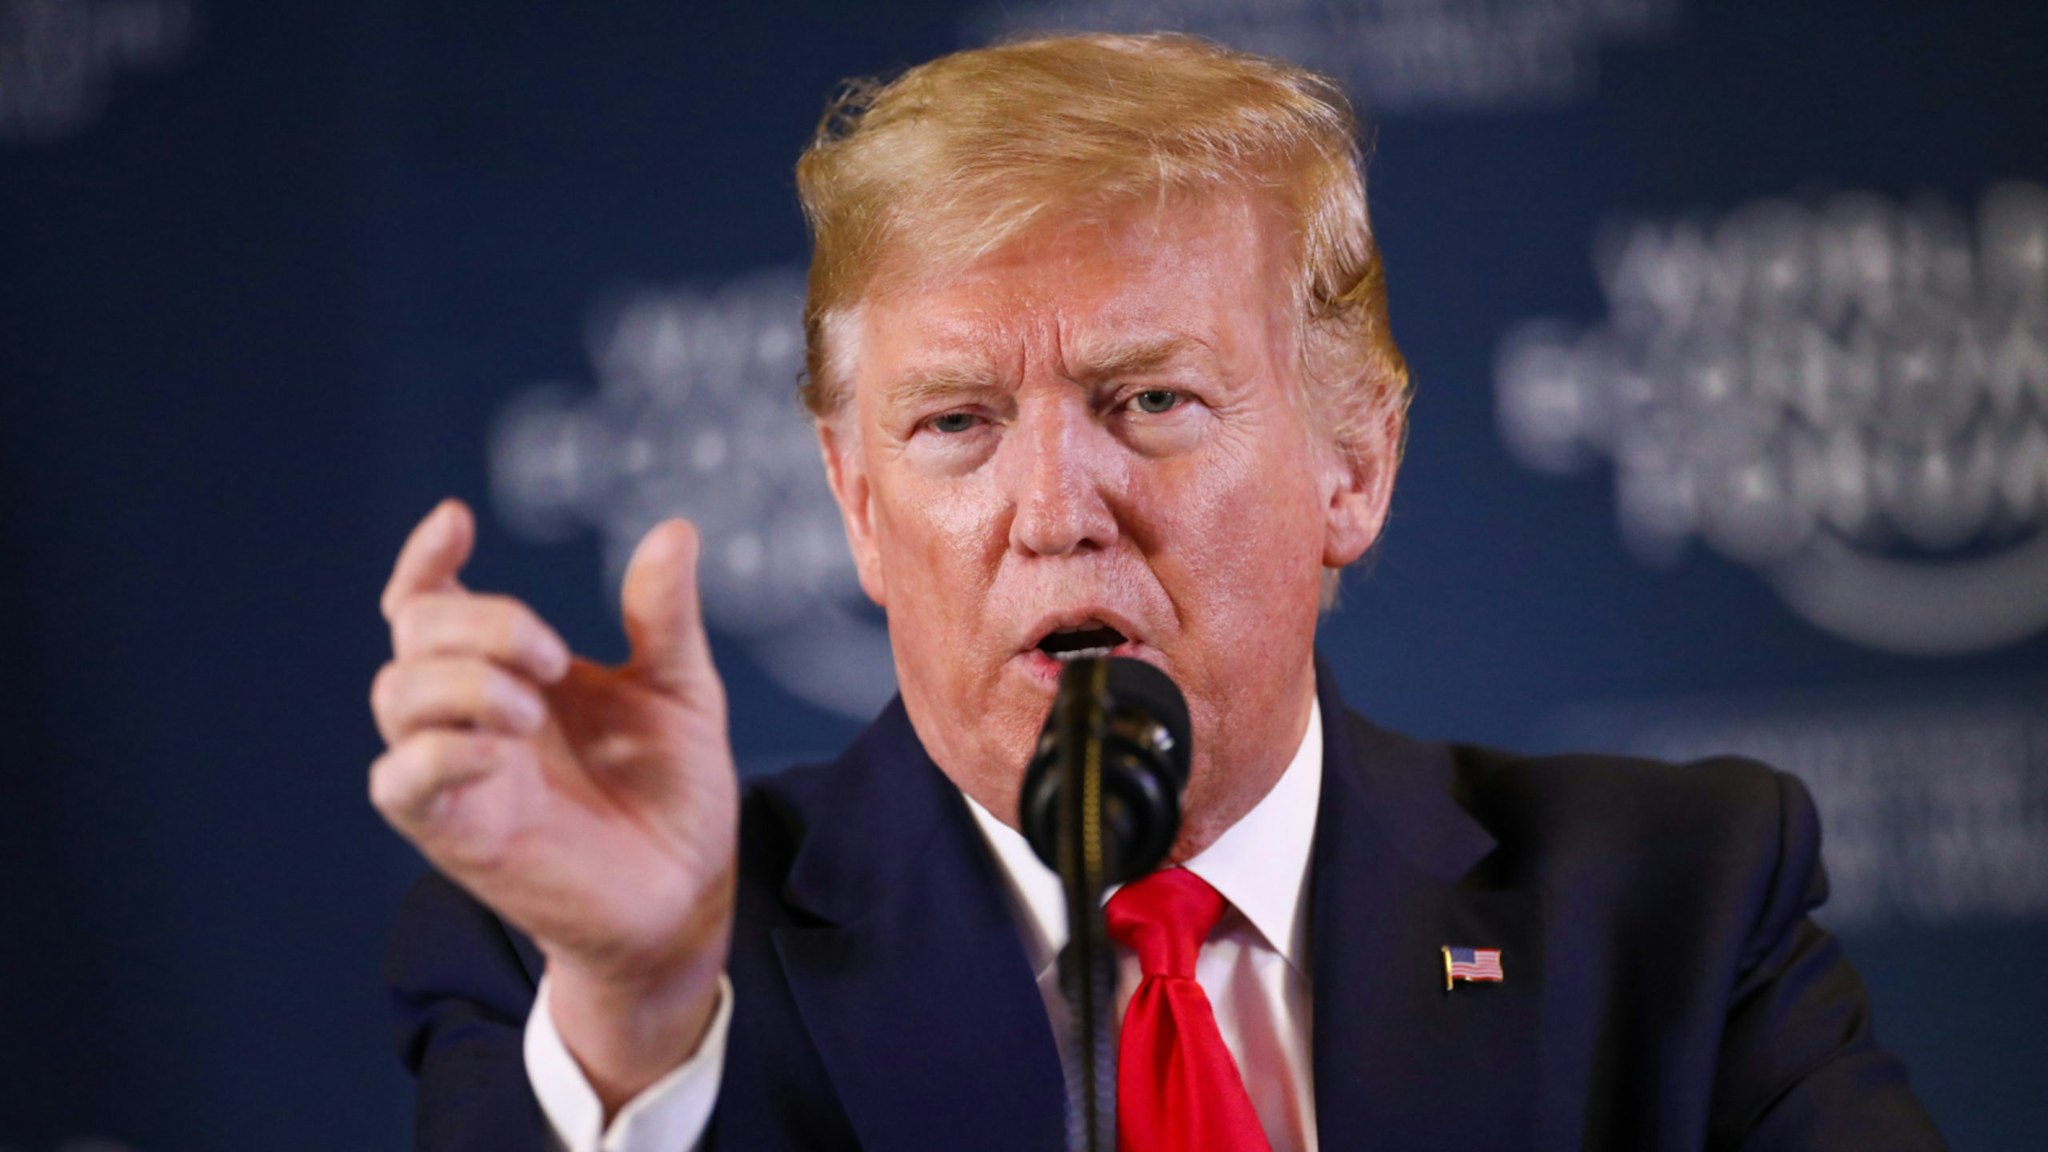 U.S. President Donald Trump, gestures as he speaks during a news conference on day two of the World Economic Forum (WEF) in Davos, Switzerland, on Wednesday, Jan. 22, 2020.